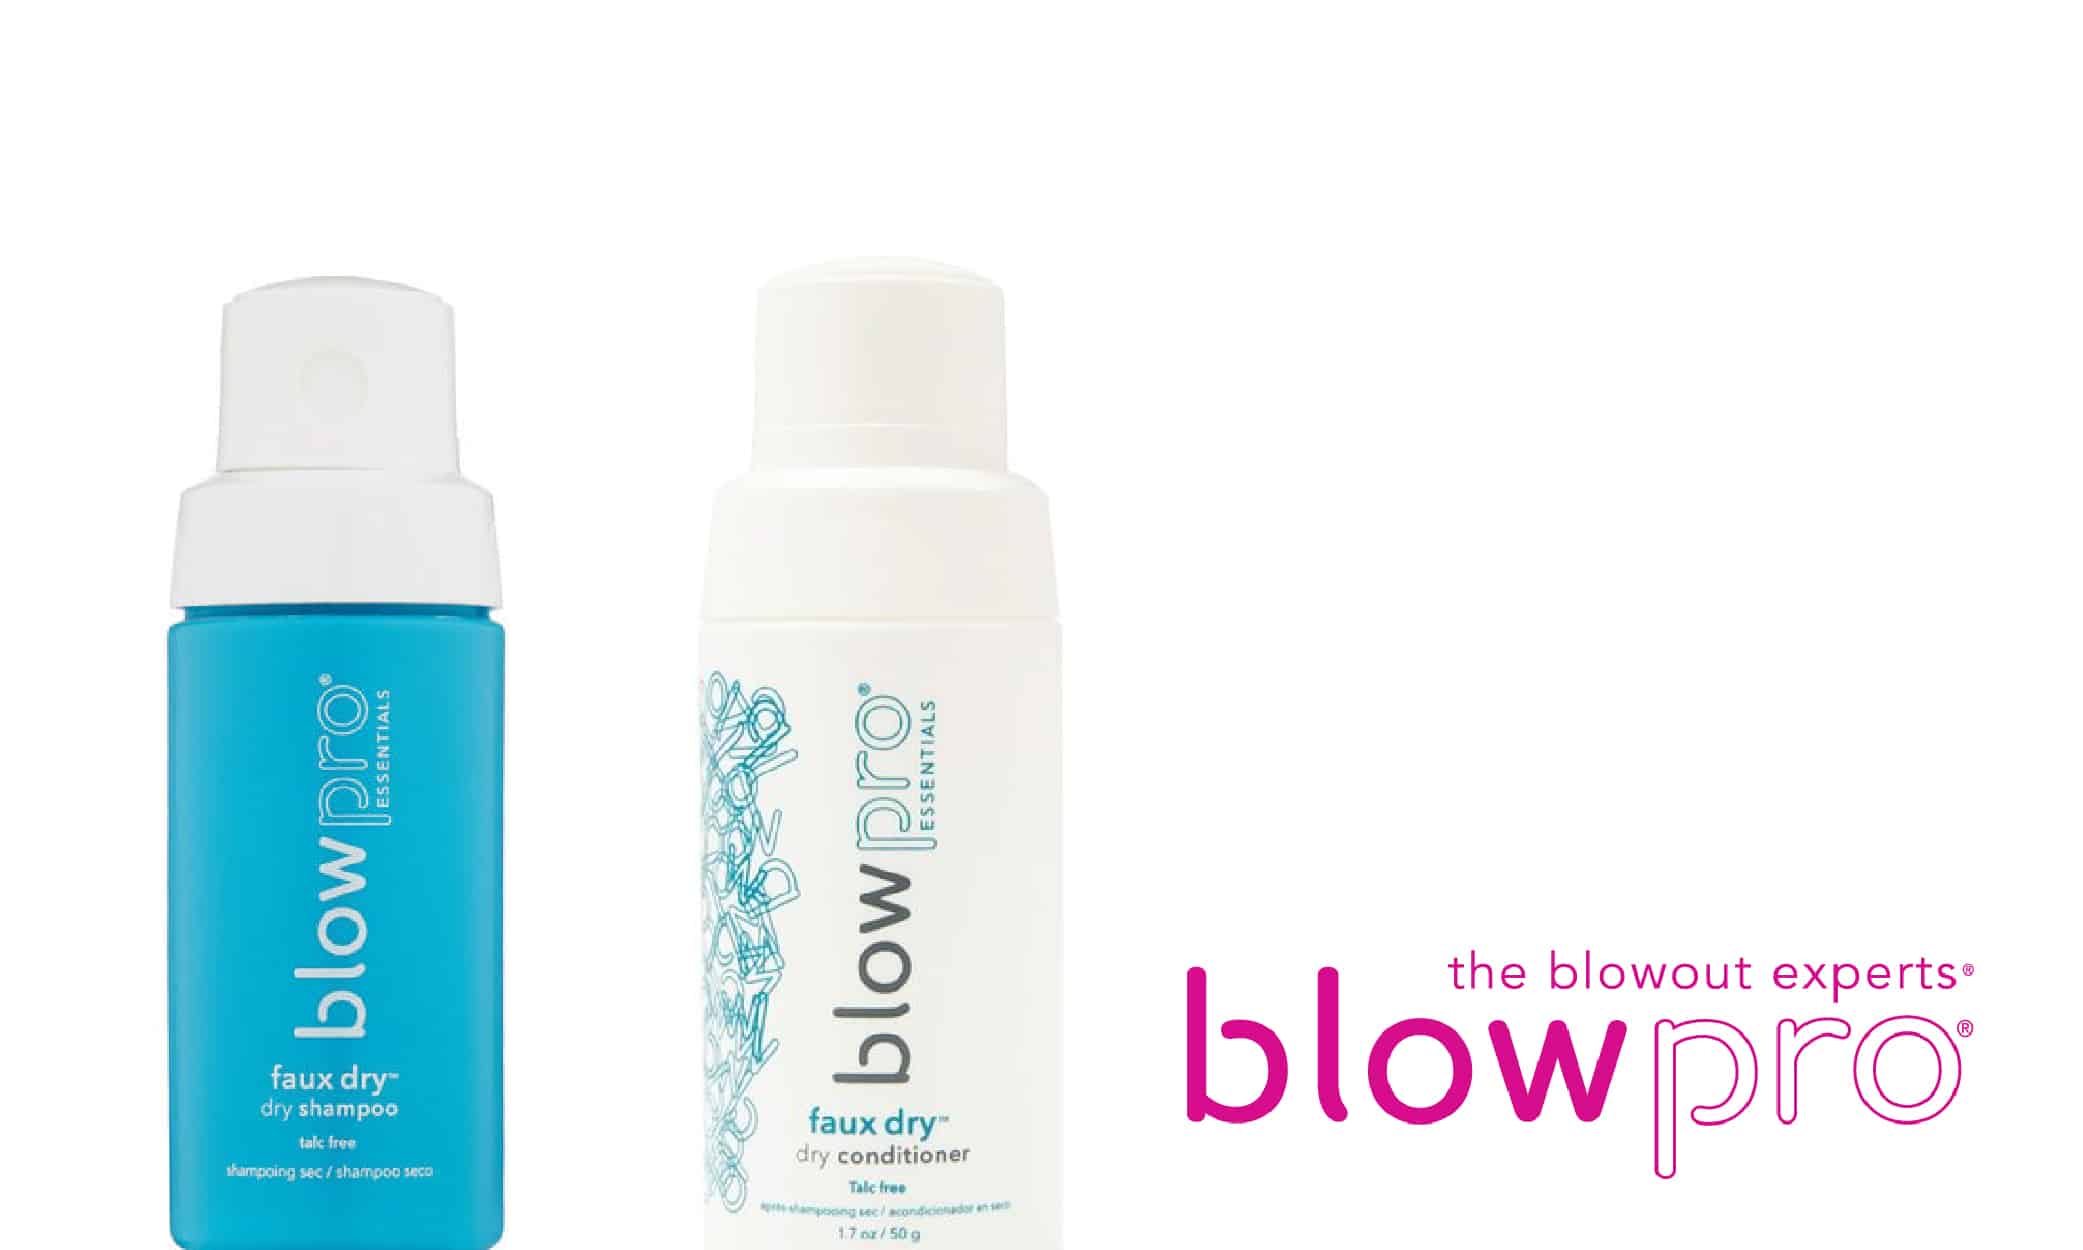 Blowpro Essentials Faux Dry Shampoo and Dry Conditioner